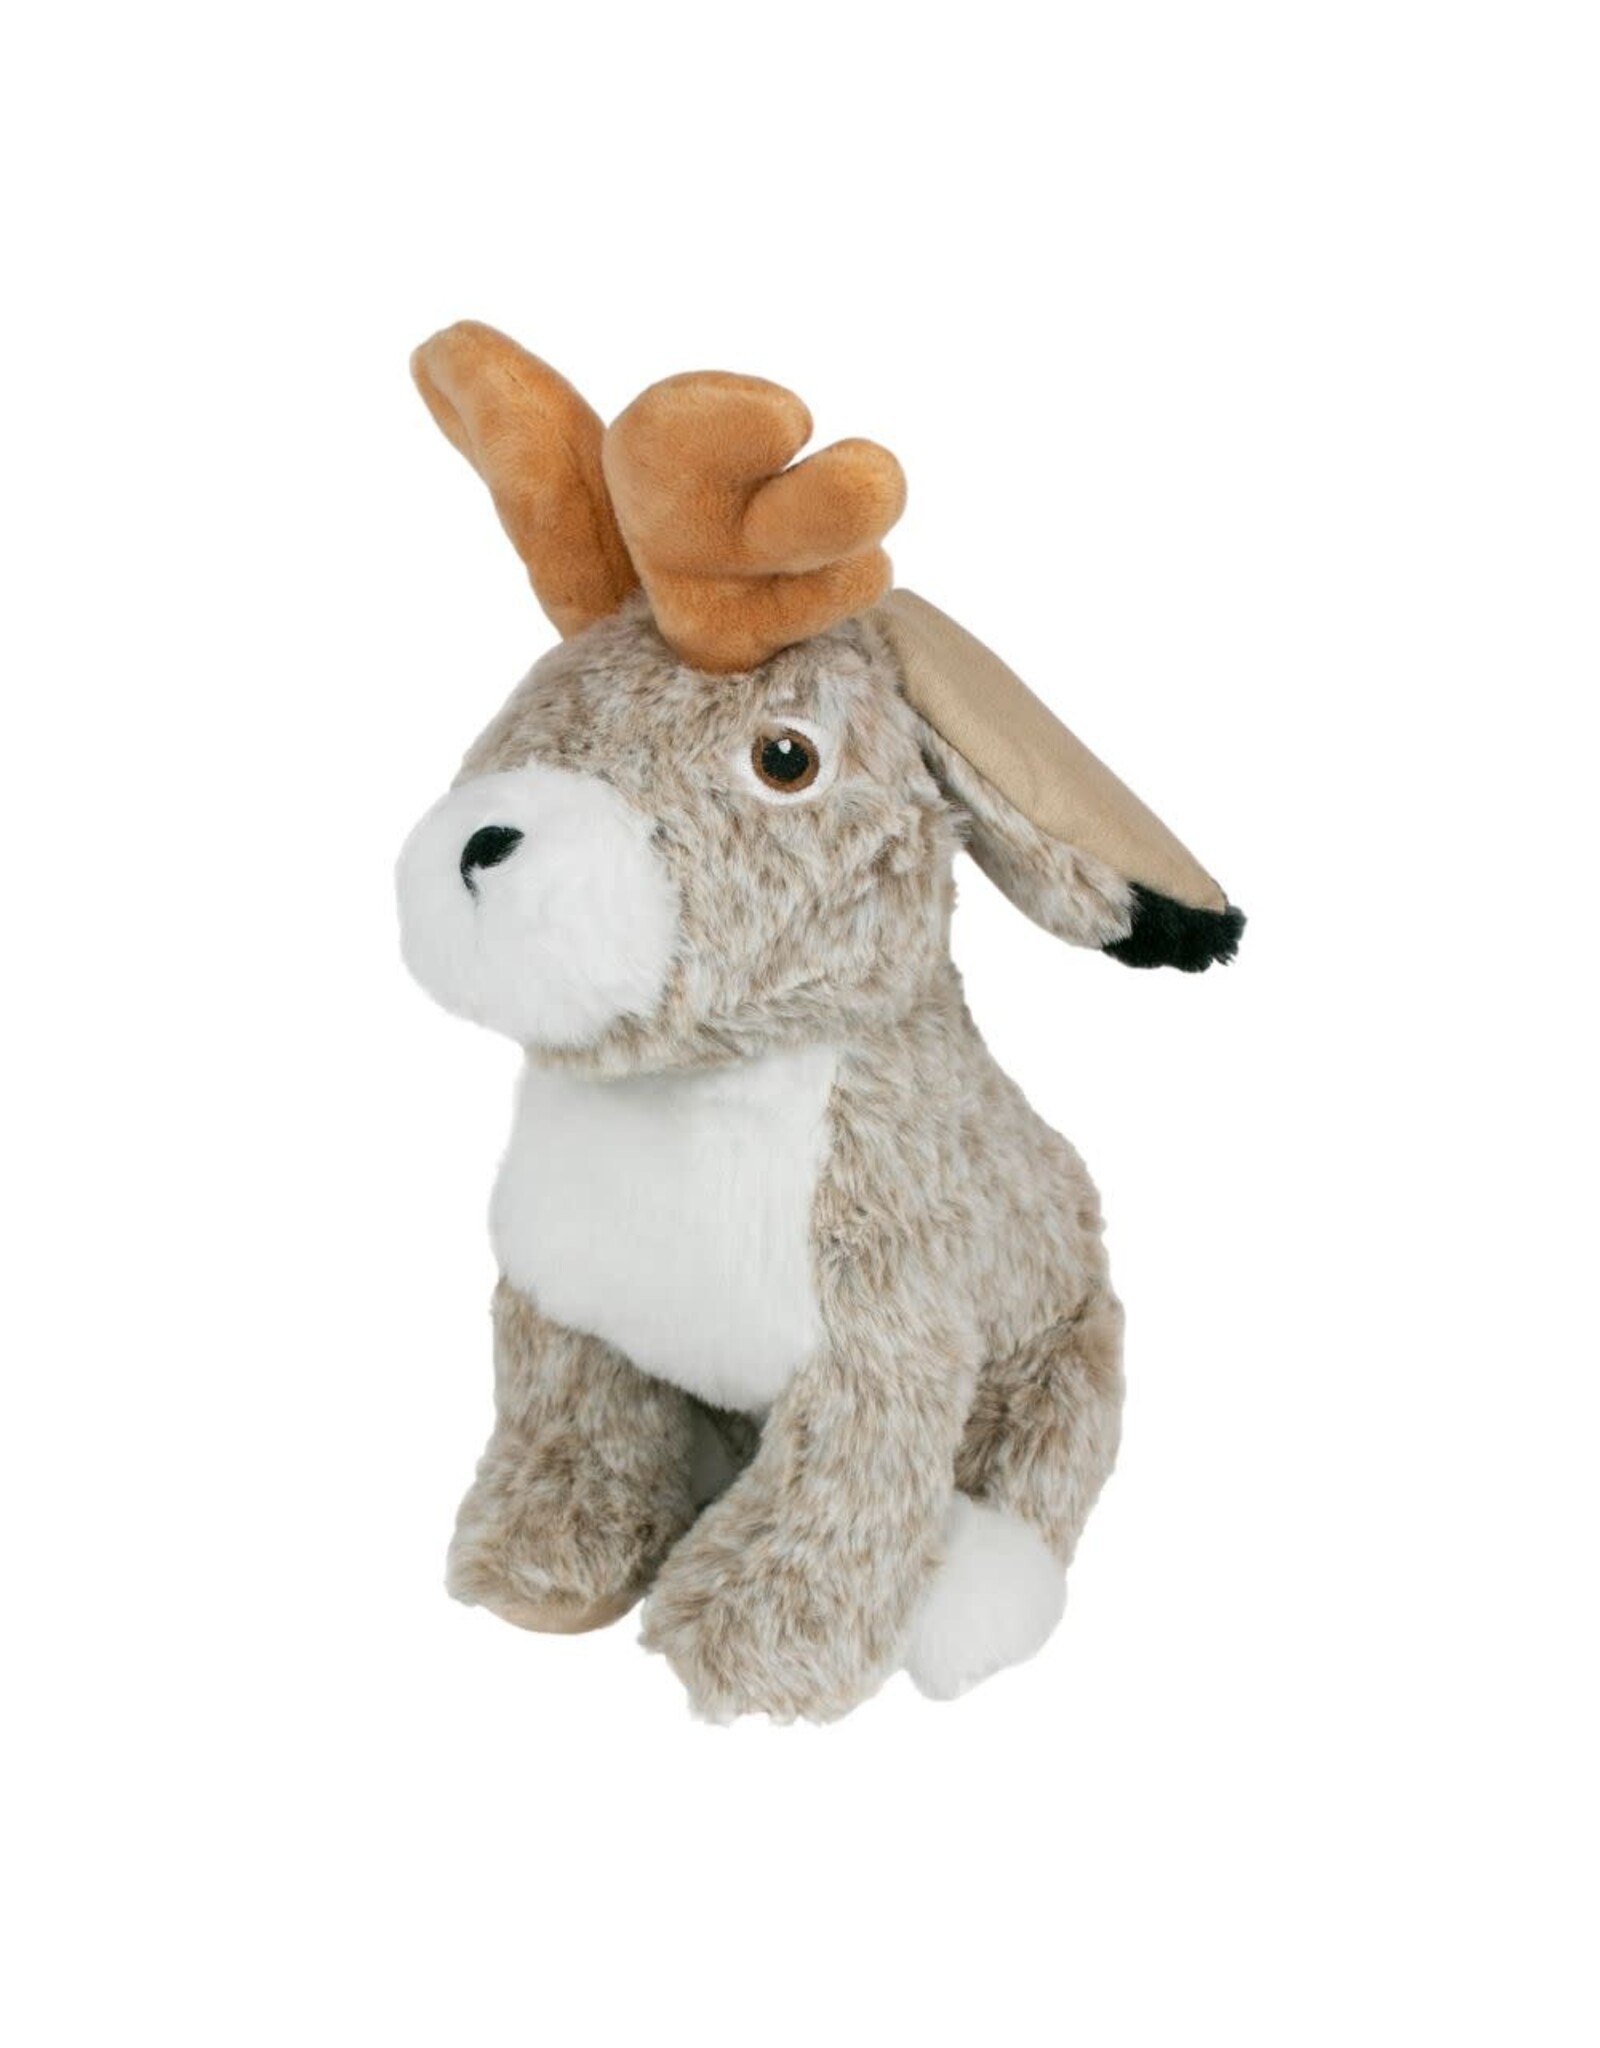 Tall Tails Tall Tails: Plush Jackalope Twitchy, 9 inch